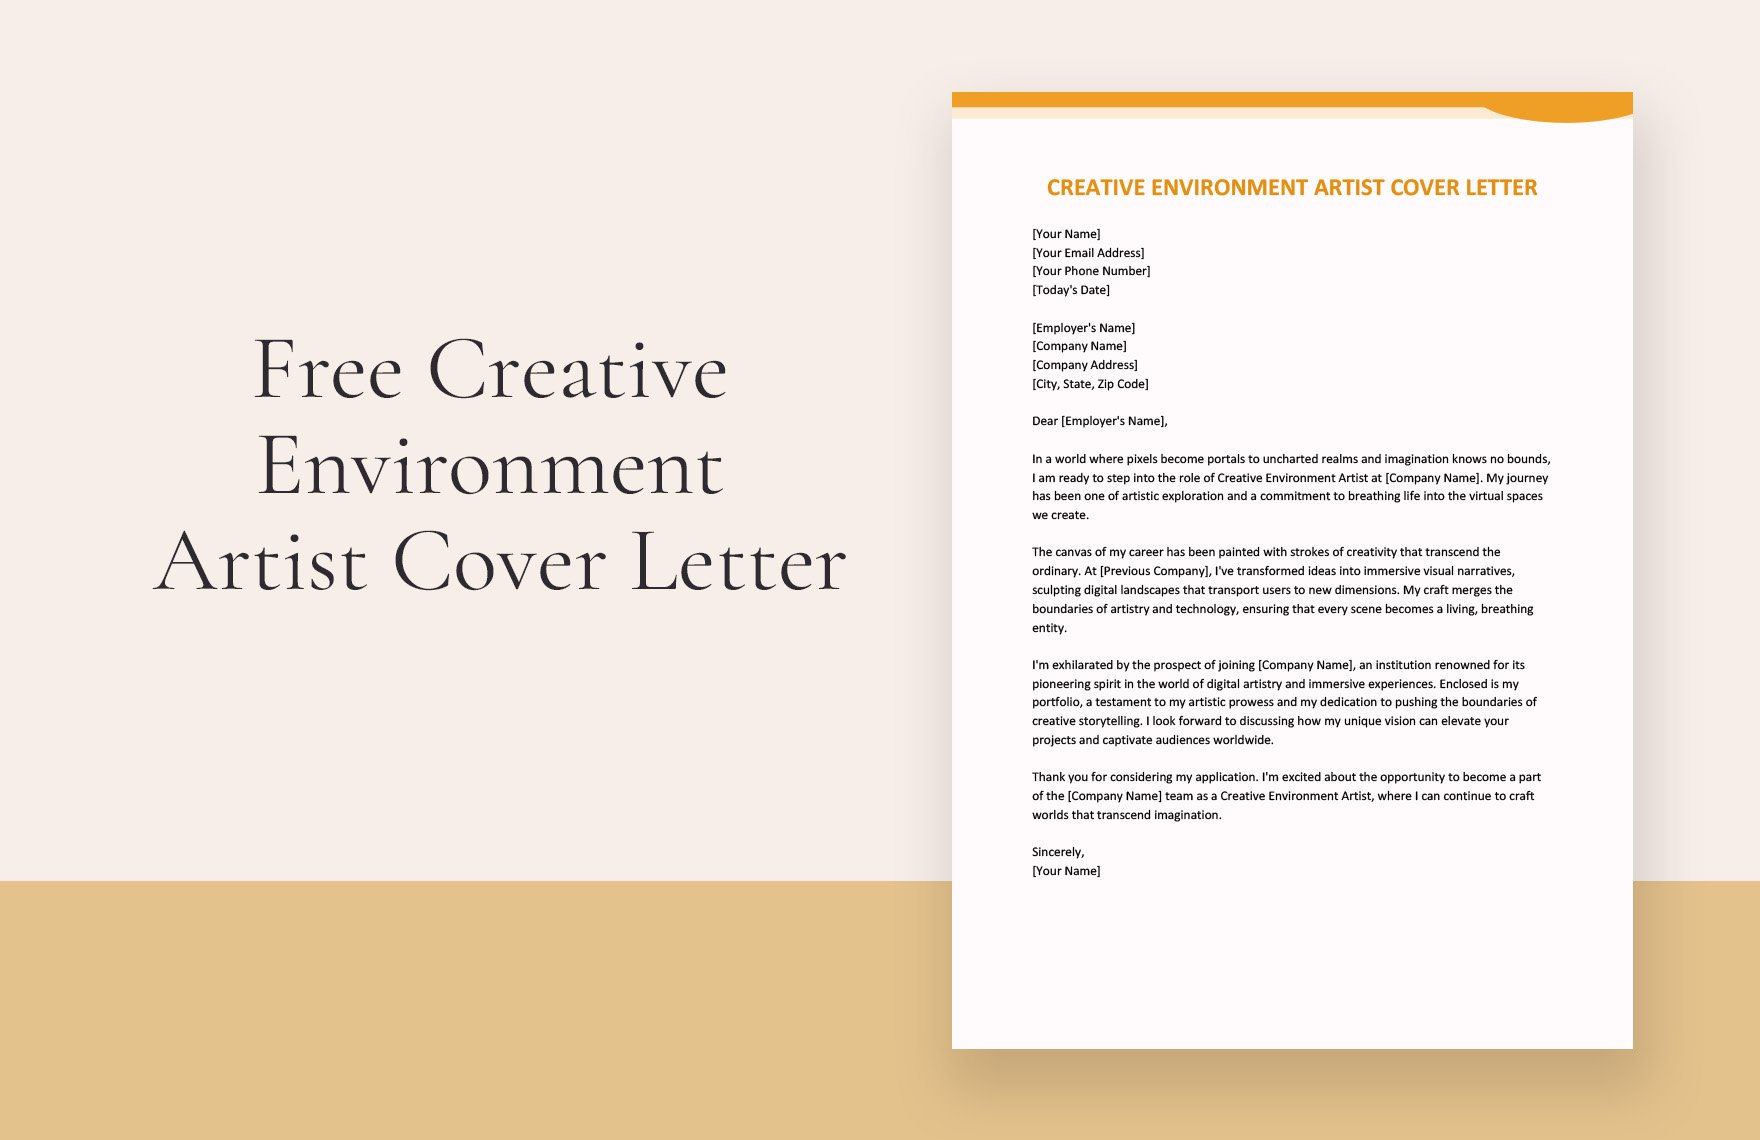 Creative Environment Artist Cover Letter in Word, Google Docs